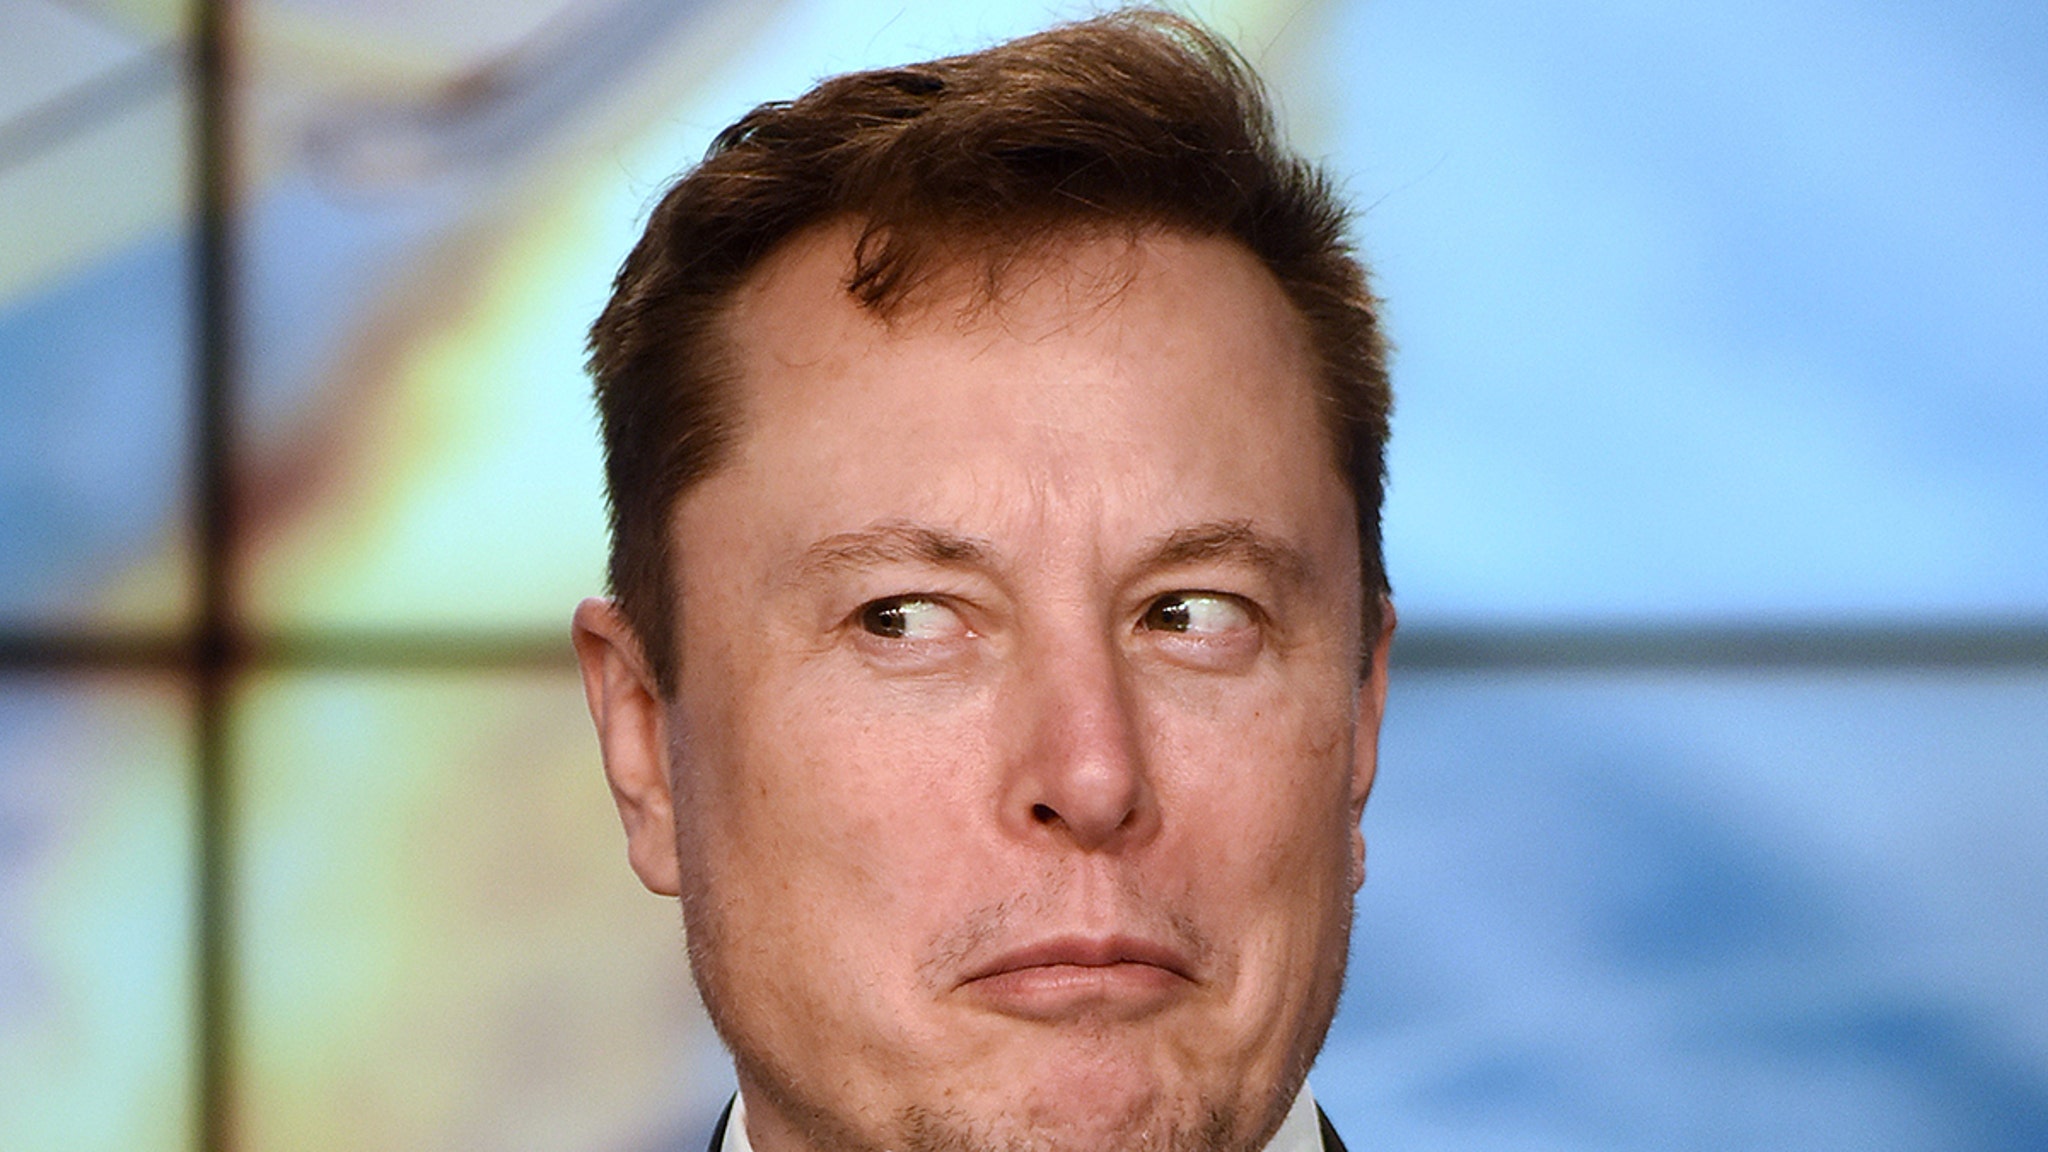 Elon Musk Lists Two Homes After Vowing To Sell Off Most Possessions